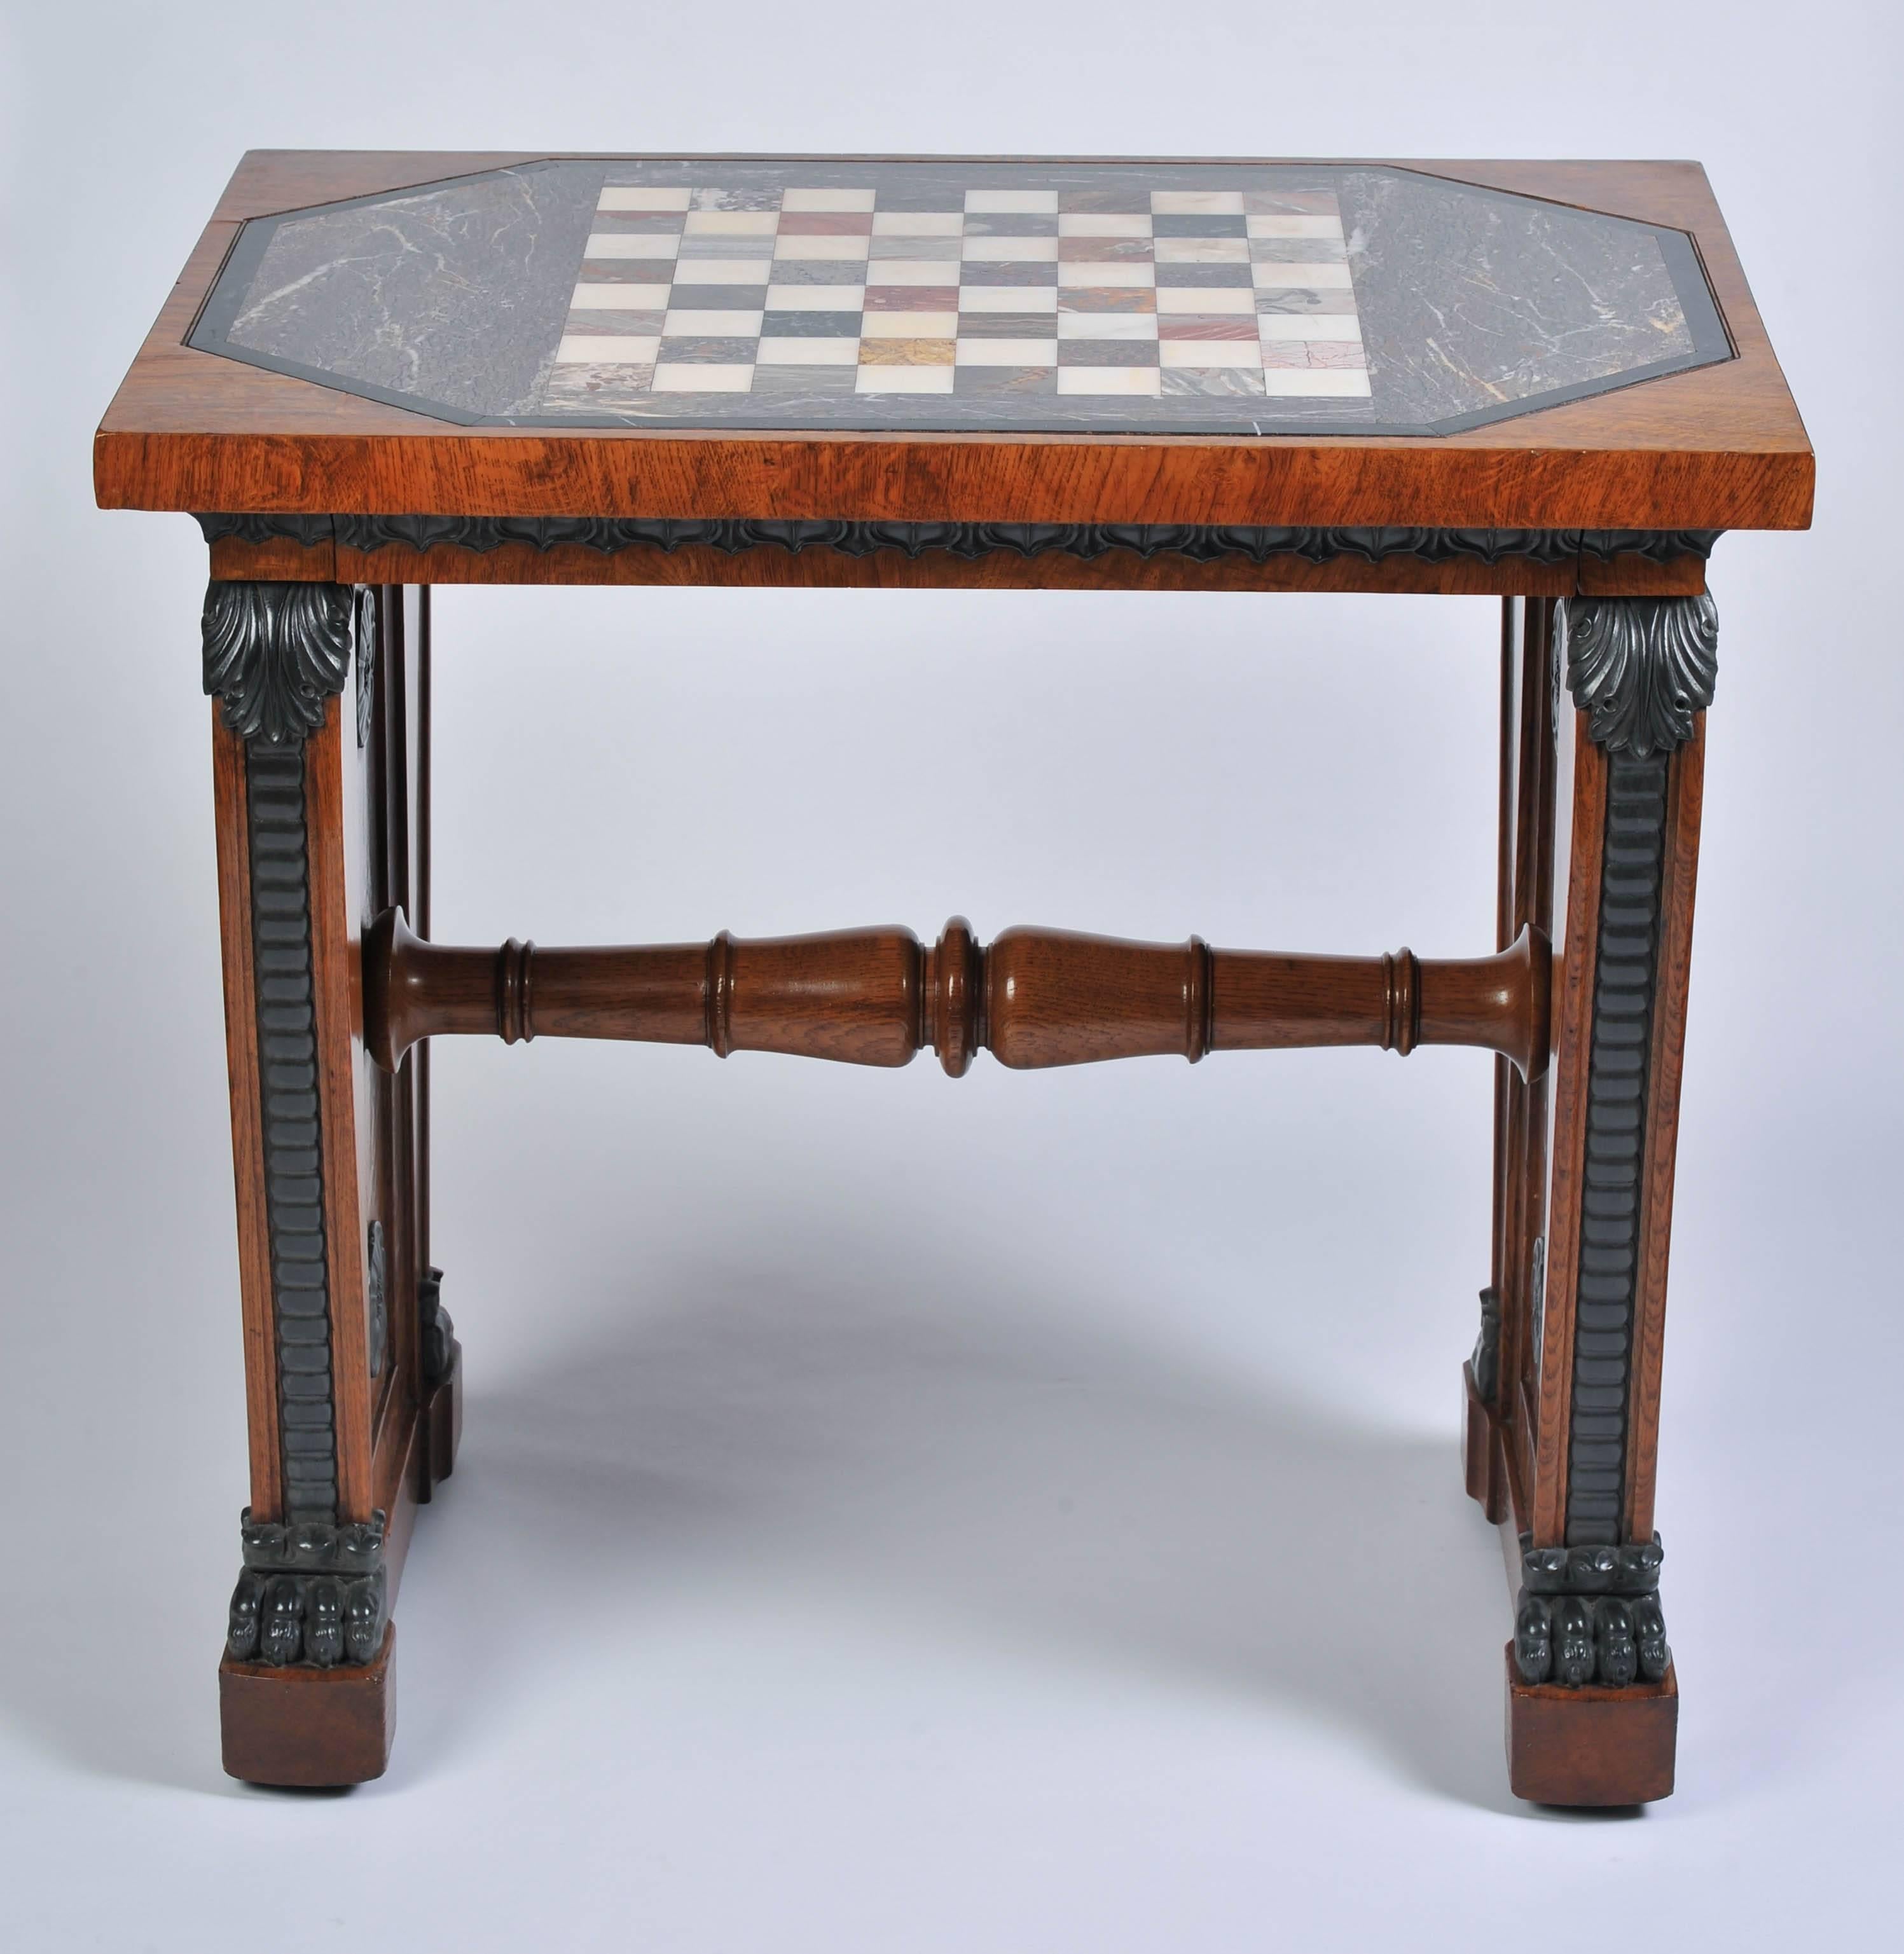 19th Century Regency Pollard Oak and Marble Chess Table by G. Bullock to Designs by T. Hope For Sale